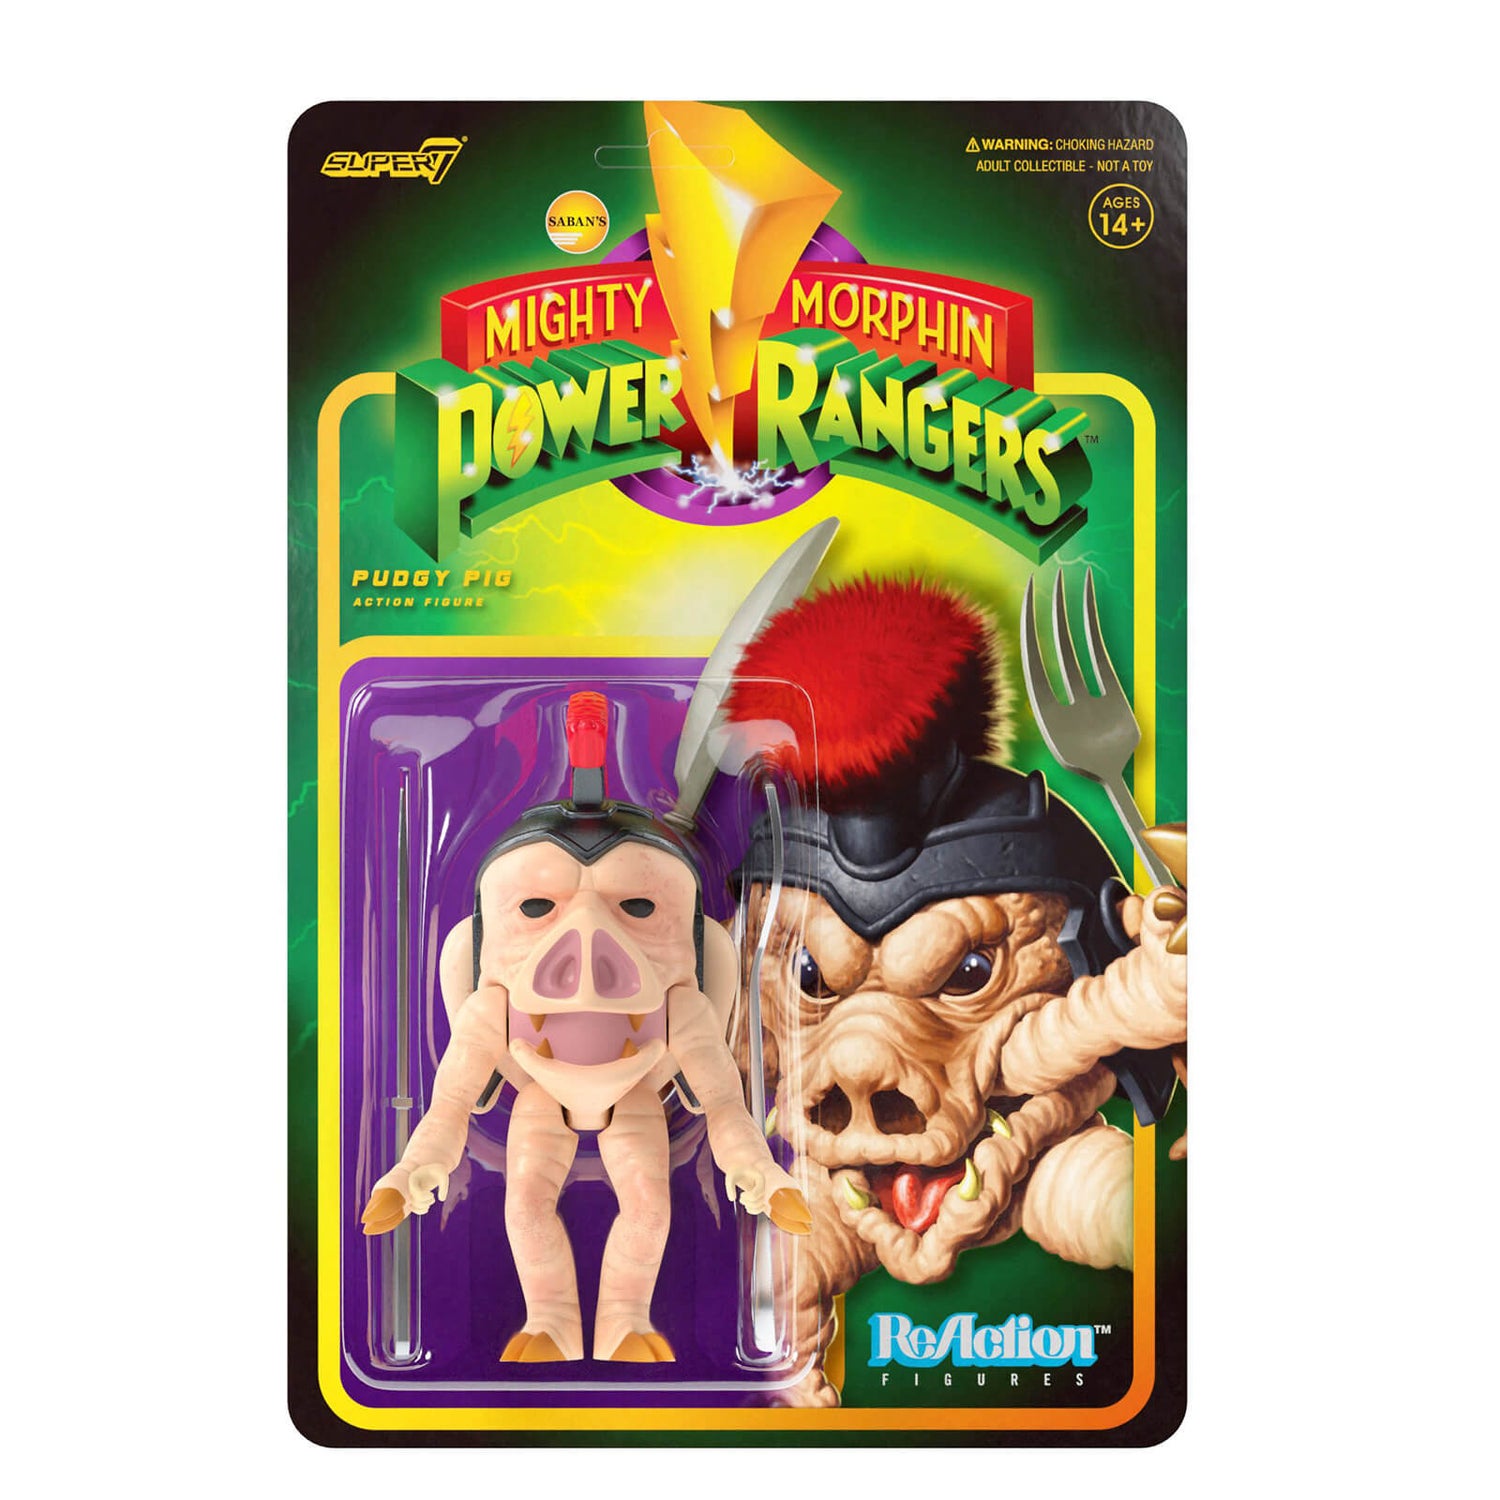 Super7 Mighty Morphin Power Rangers ReAction Figure - Pudgy Pig